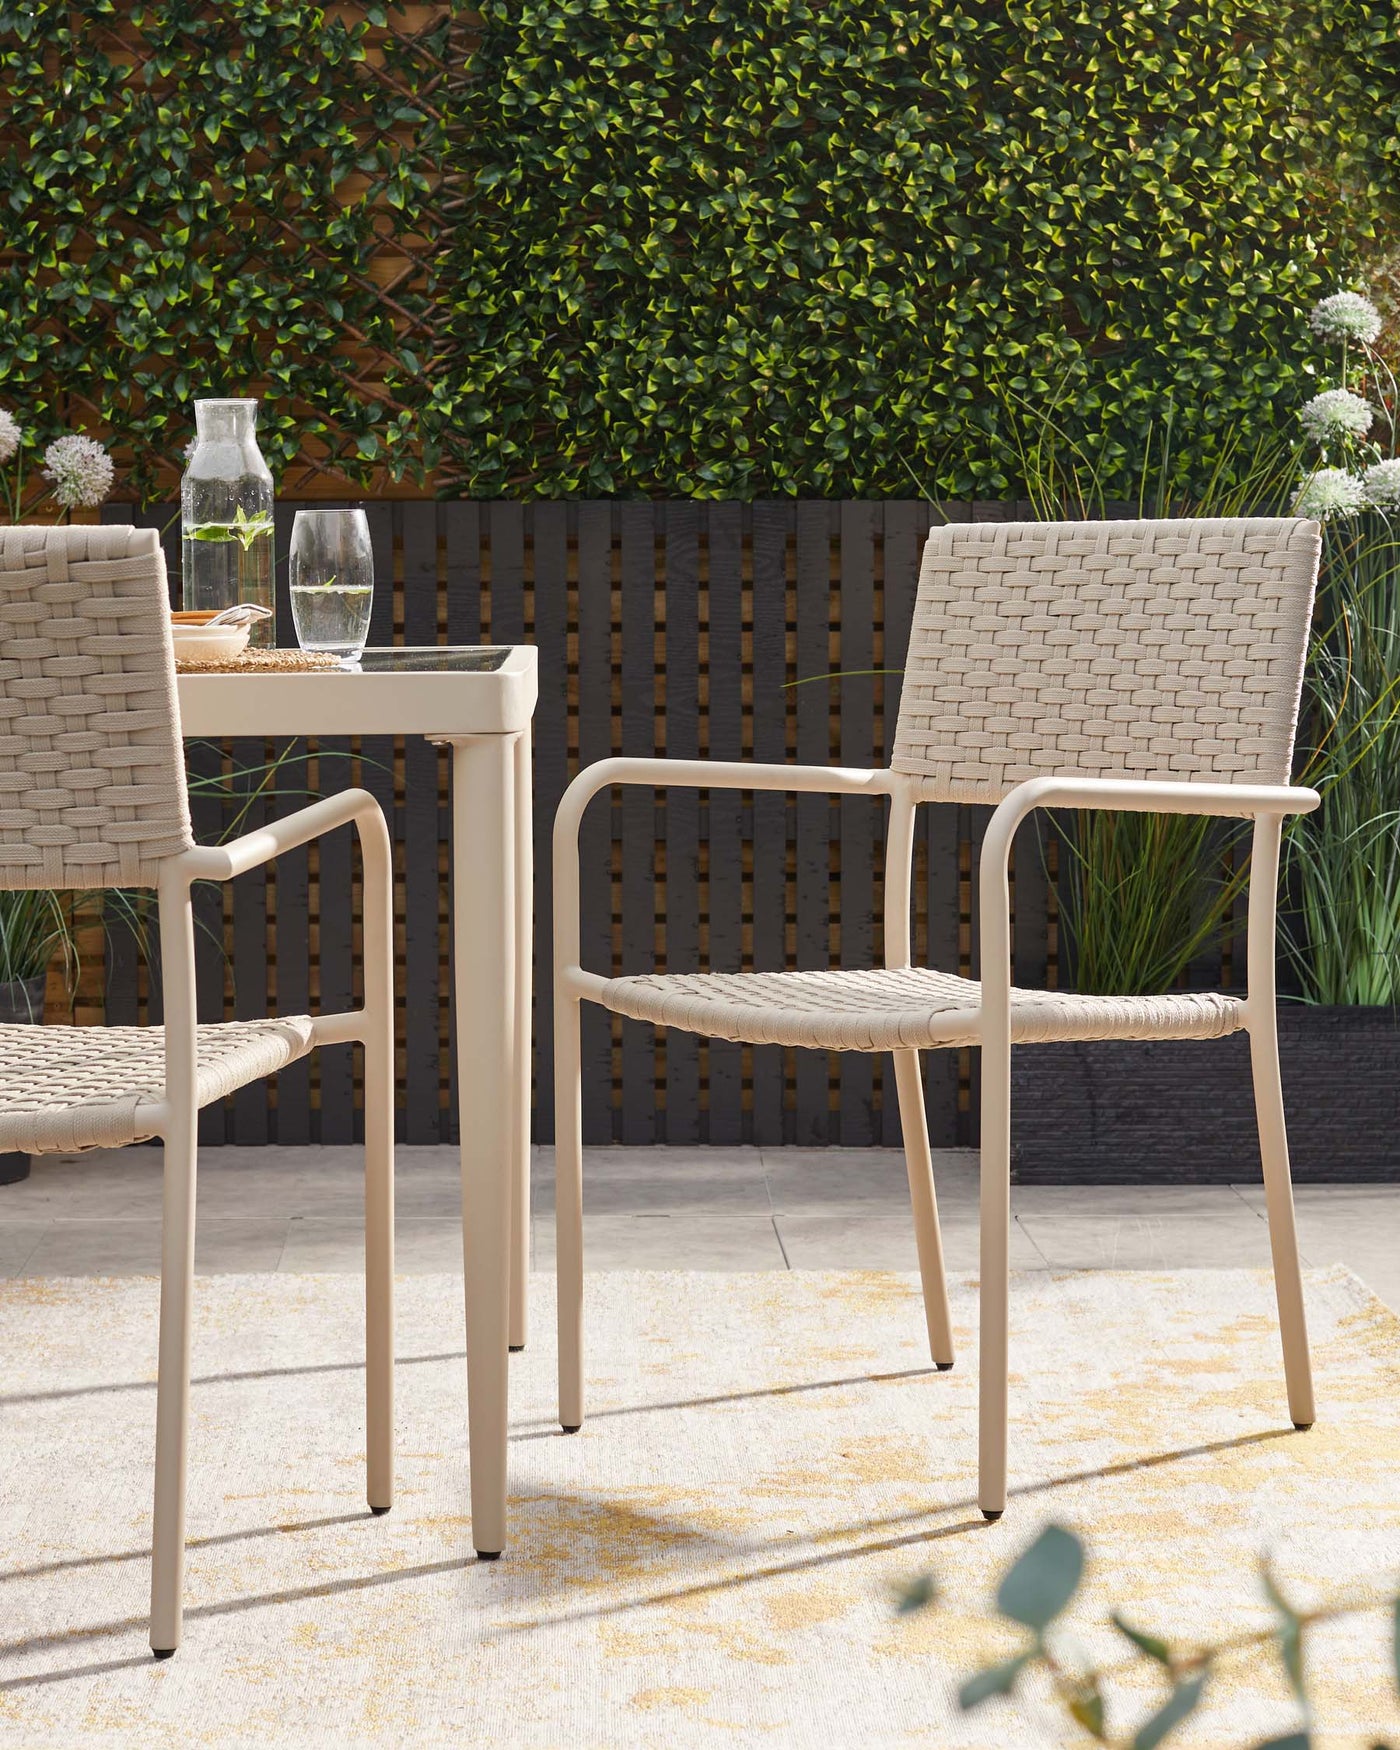 Outdoor furniture featuring two modern beige armchairs with woven backrests and seats, and a matching slim beige square table with a clear vase and glass set upon it, situated on a textured cream and yellow area rug. The scene is complemented by a backdrop of a green leafy hedge and a dark wooden slat fence, evoking an inviting and contemporary patio ambiance.